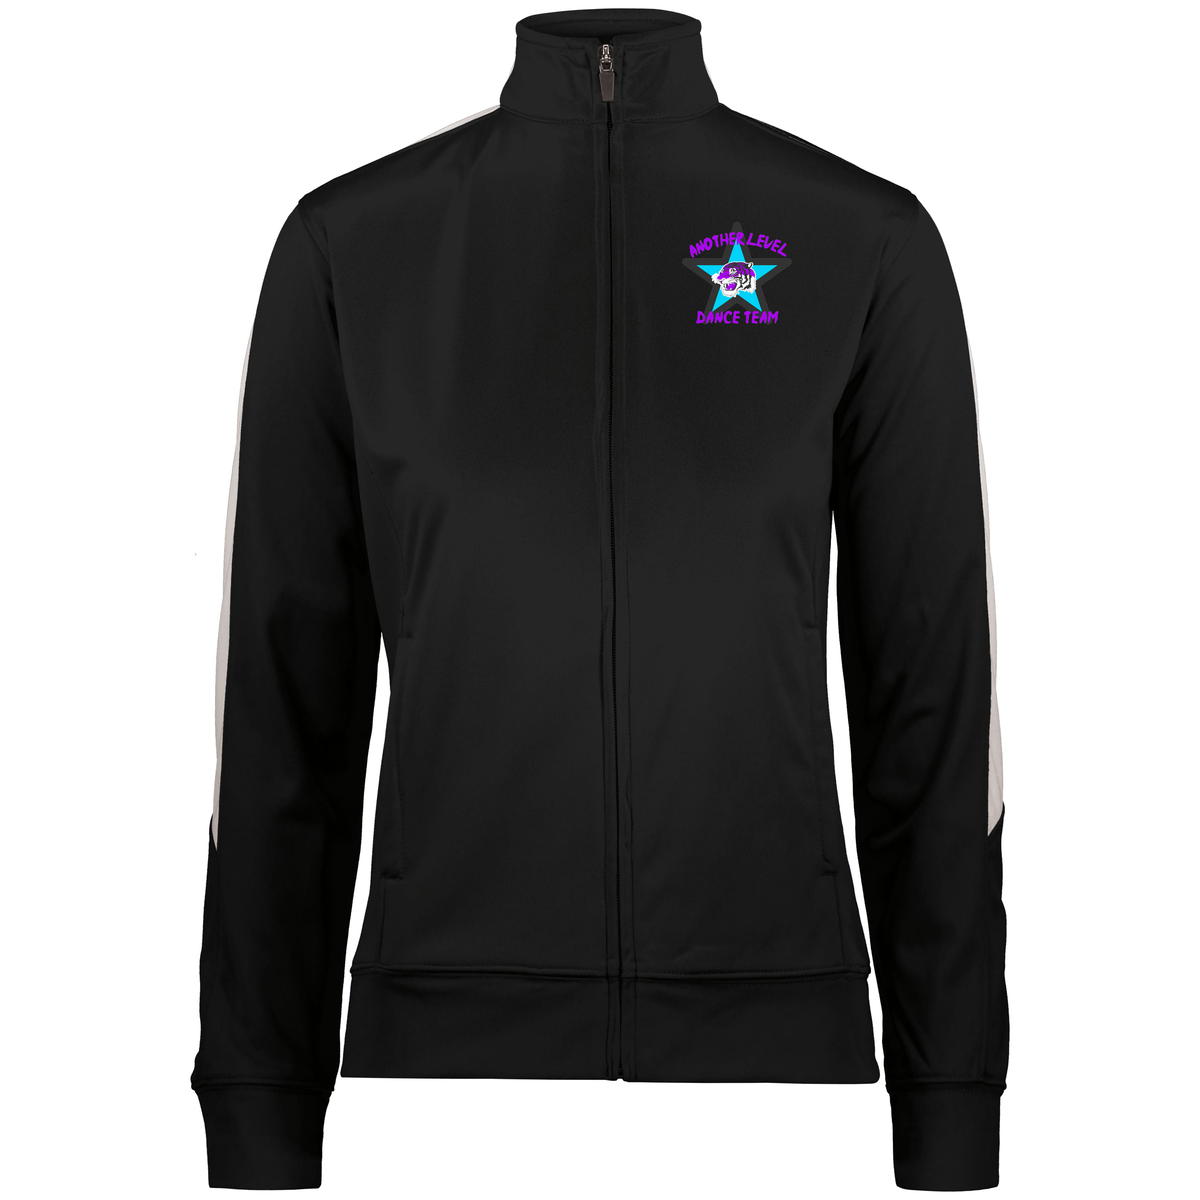 Another Level Dance Team Women's Track Jacket